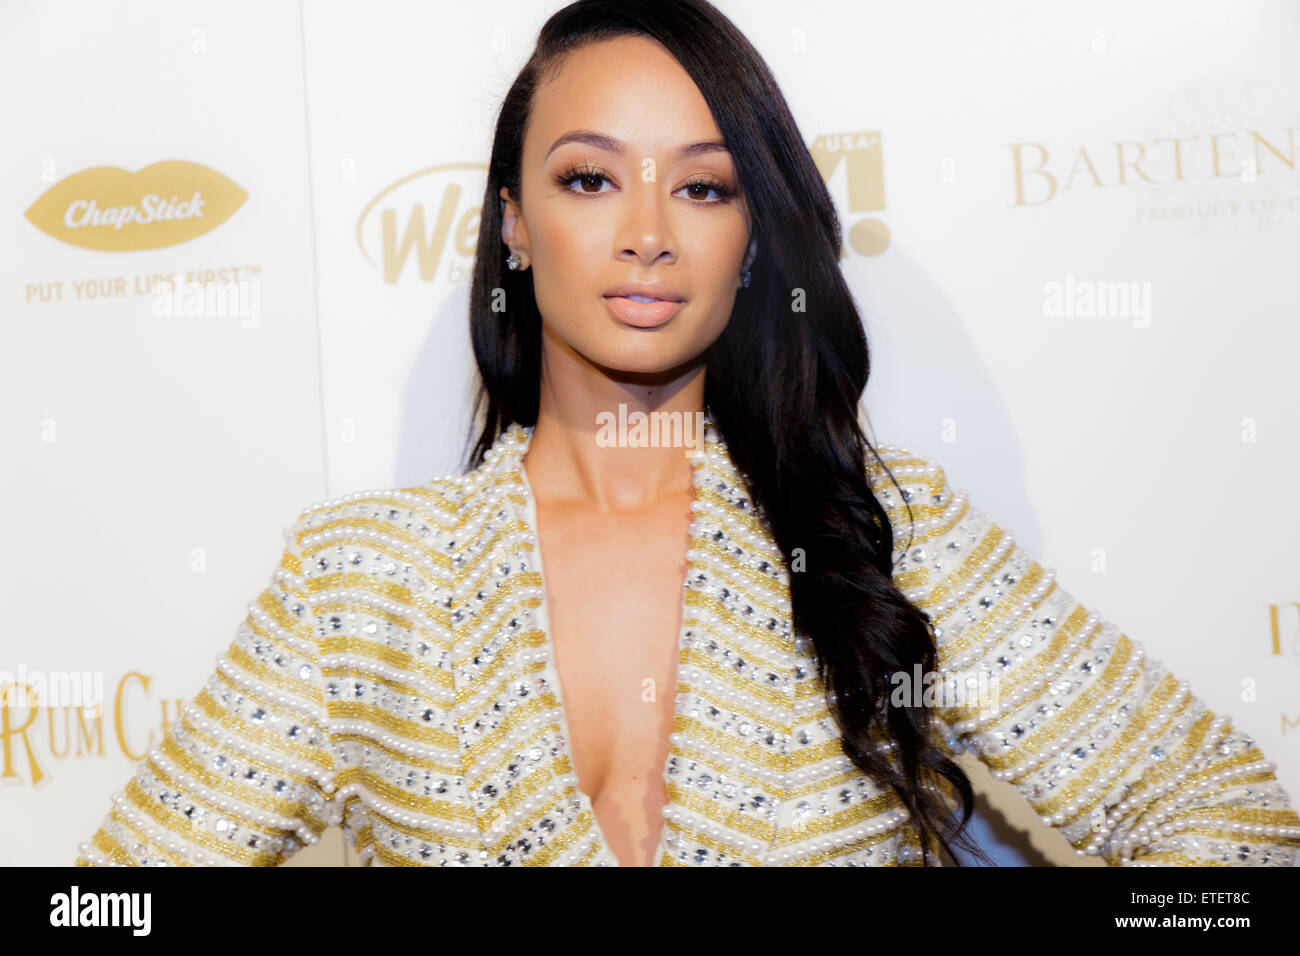 OK! Magazine pre-Grammy party at Lure Nightclub with a performance by Nico & Vinz  Featuring: Draya Michele Where: Hollywood, California, United States When: 05 Feb 2015 Credit: WENN.com Stock Photo